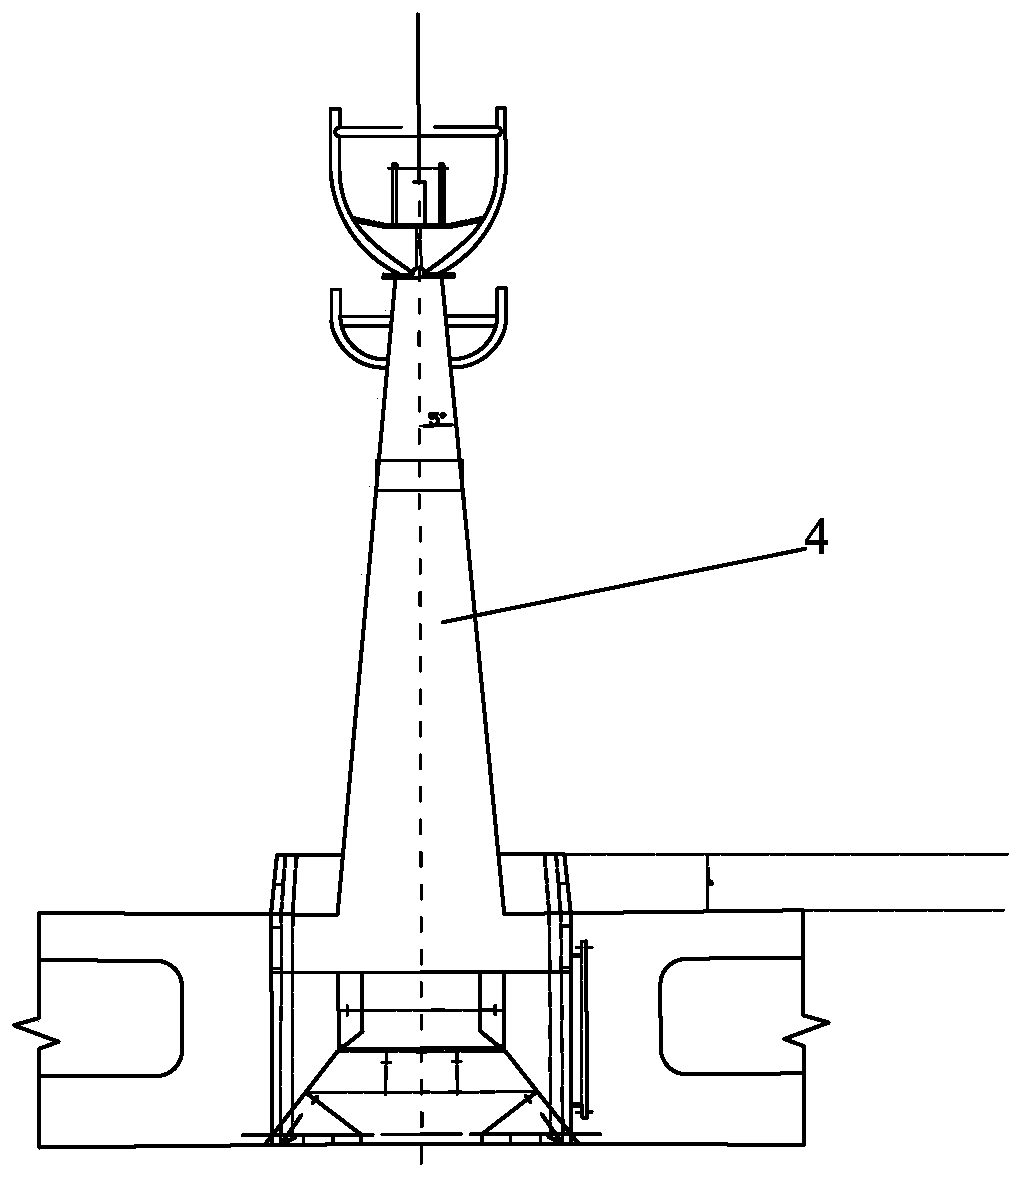 Low-resistance mast of high-speed planing boat